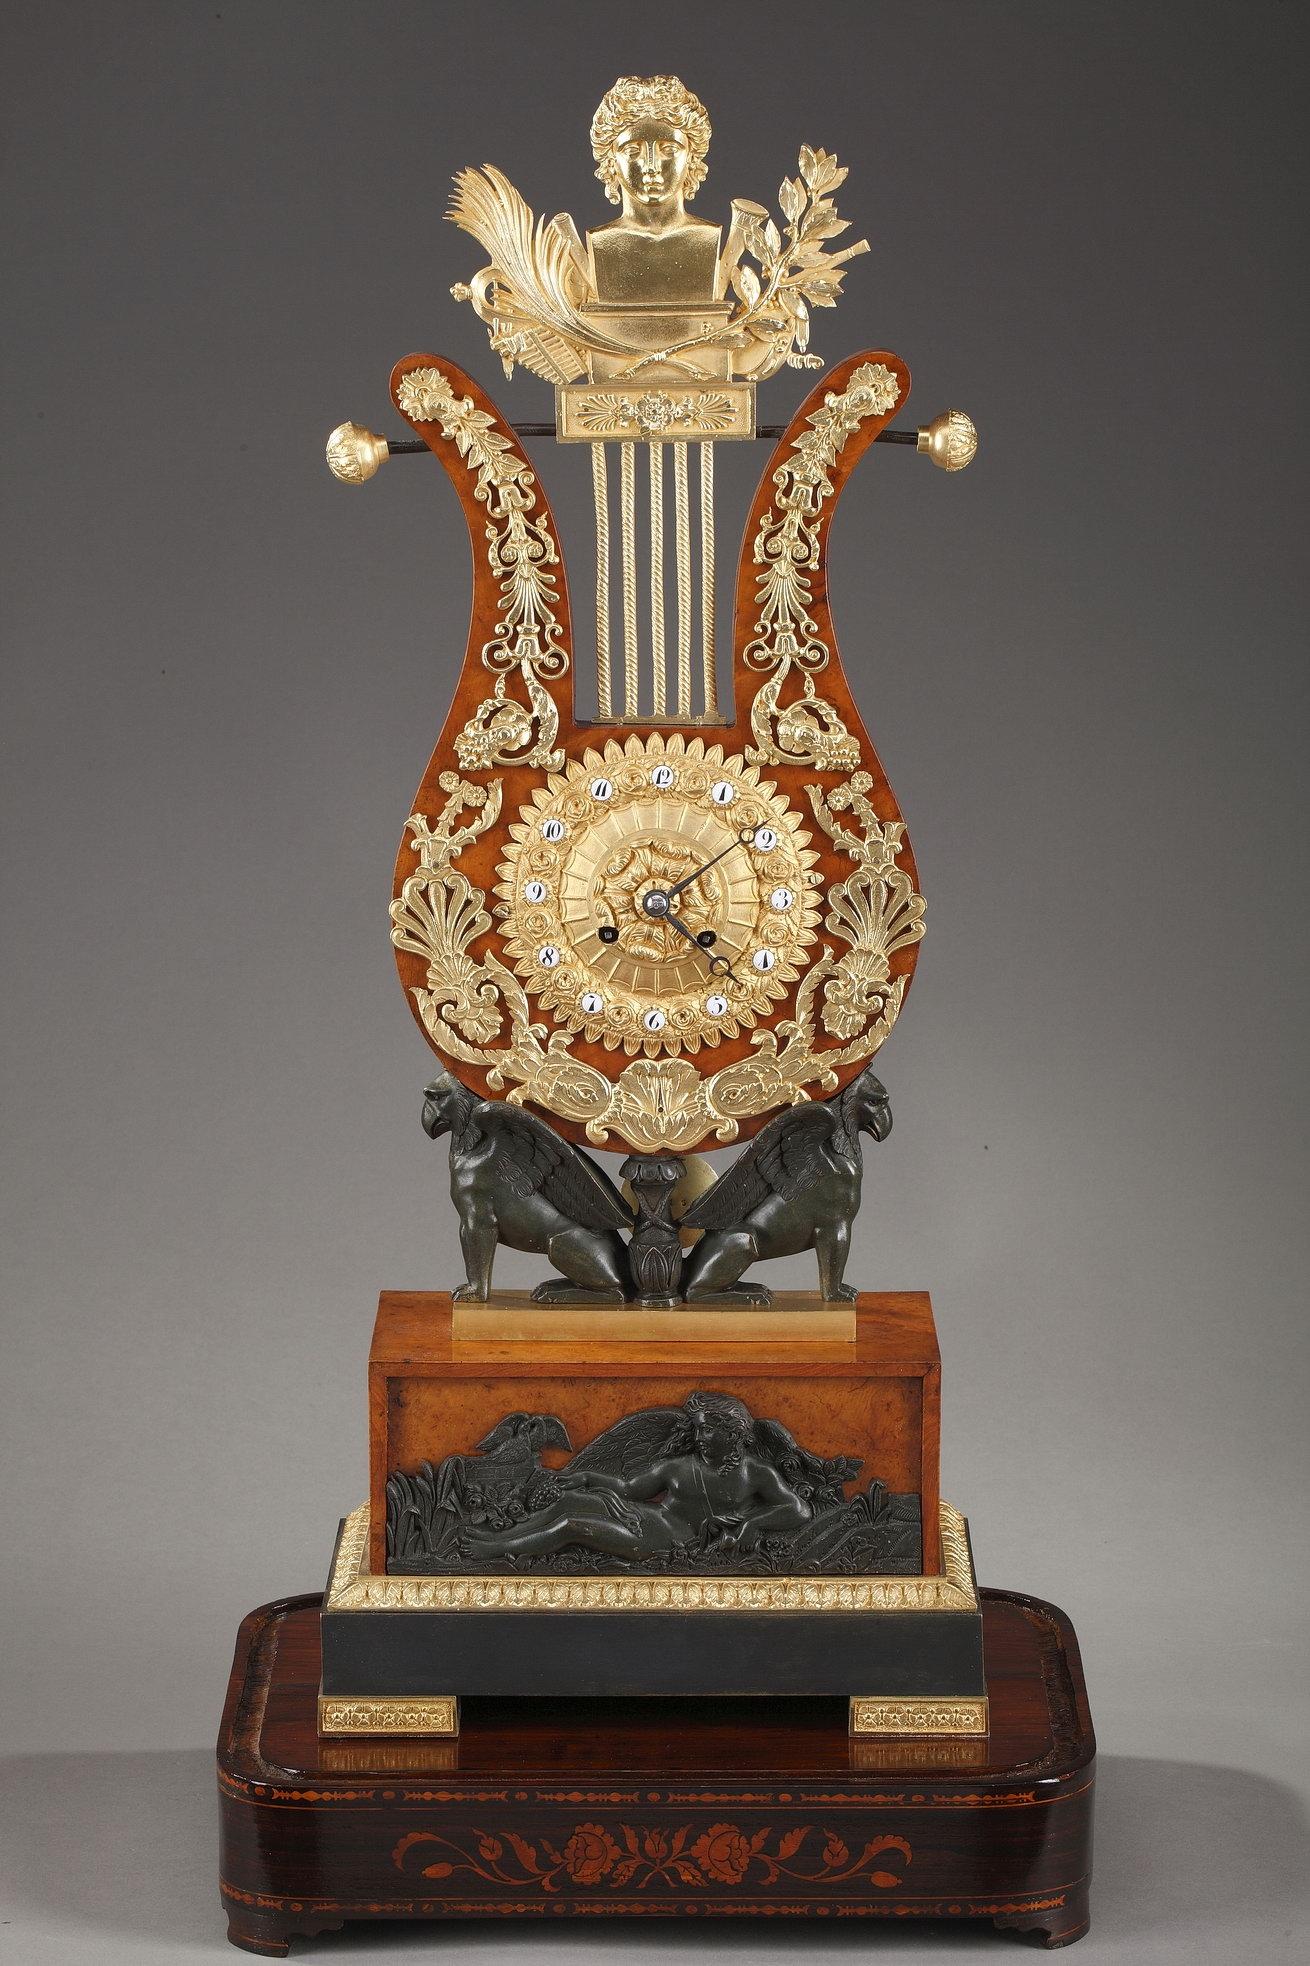 A stunning Restauration lyre clock crafted of burr elm veneer with hand-chiseled gilt and patinated bronze decoration. Rich foliage and floral motifs surround the ormolu dial, which is lined with petals. The dial ring is embellished with roses and